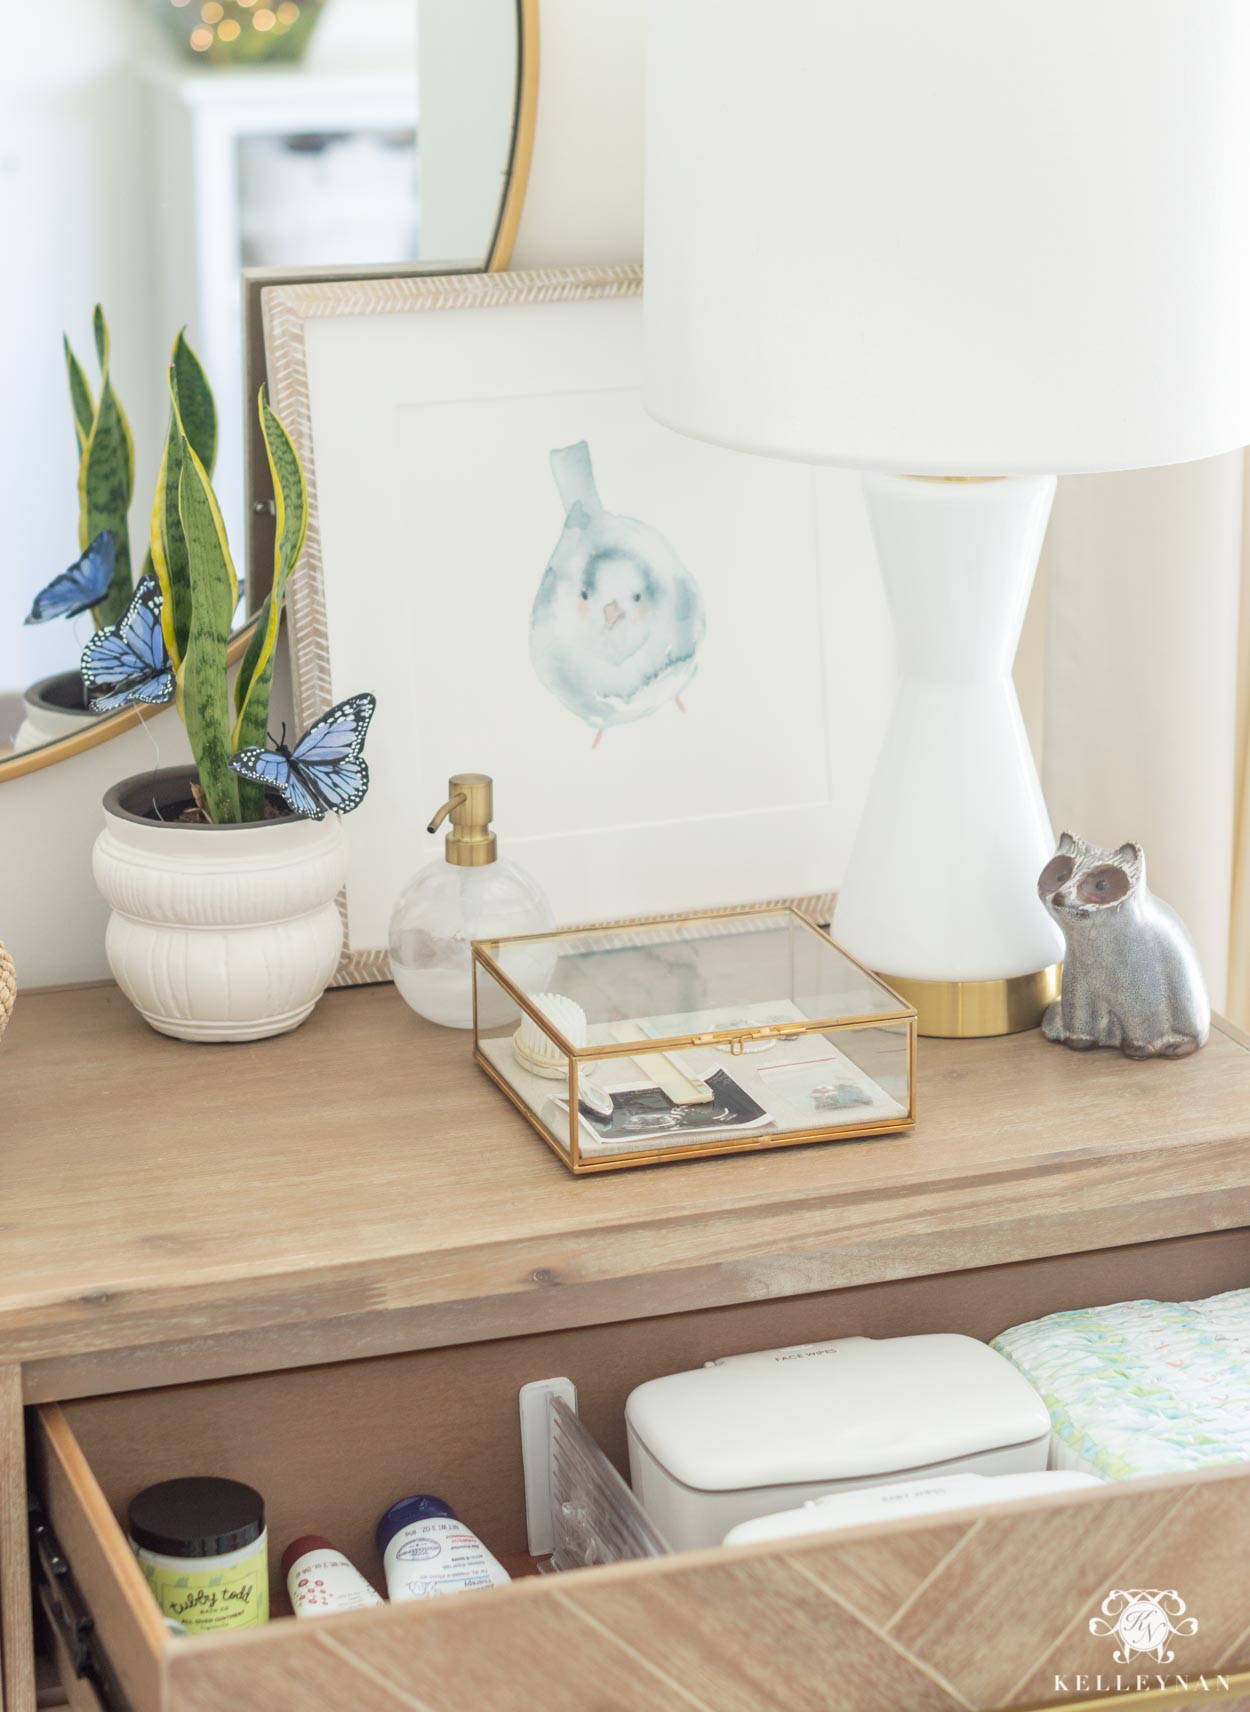 THE 8 MOST BRILLIANT CHANGING TABLE ORGANIZERS YOU'LL NEED - Nursery Design  Studio